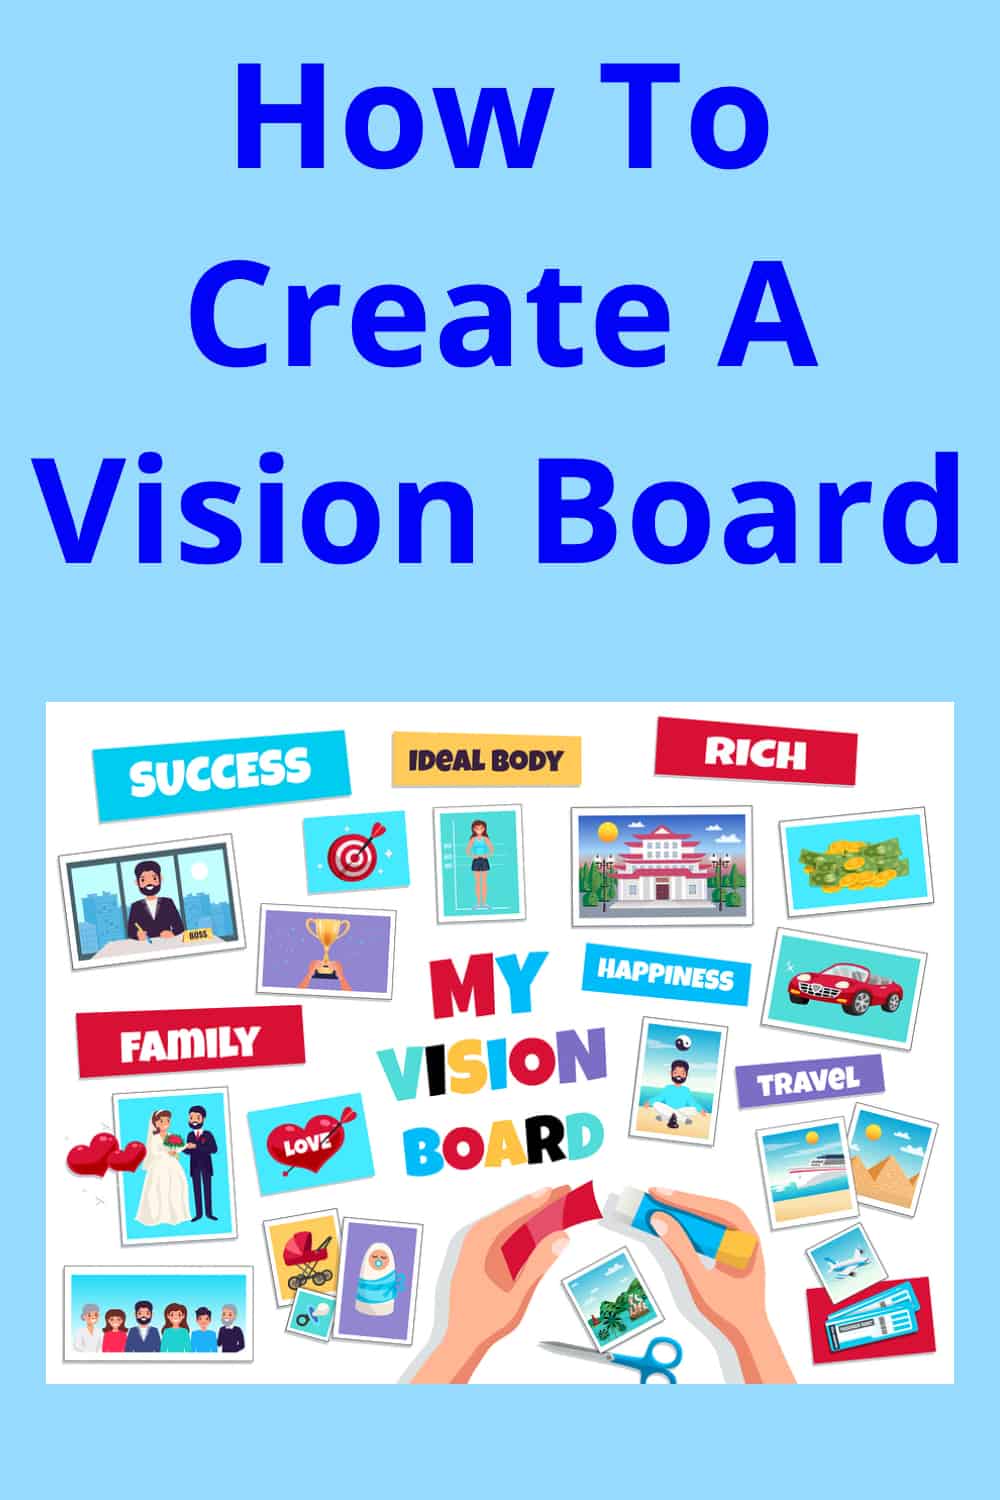 How To Create A Vision Board - Law Of Attraction Pointers